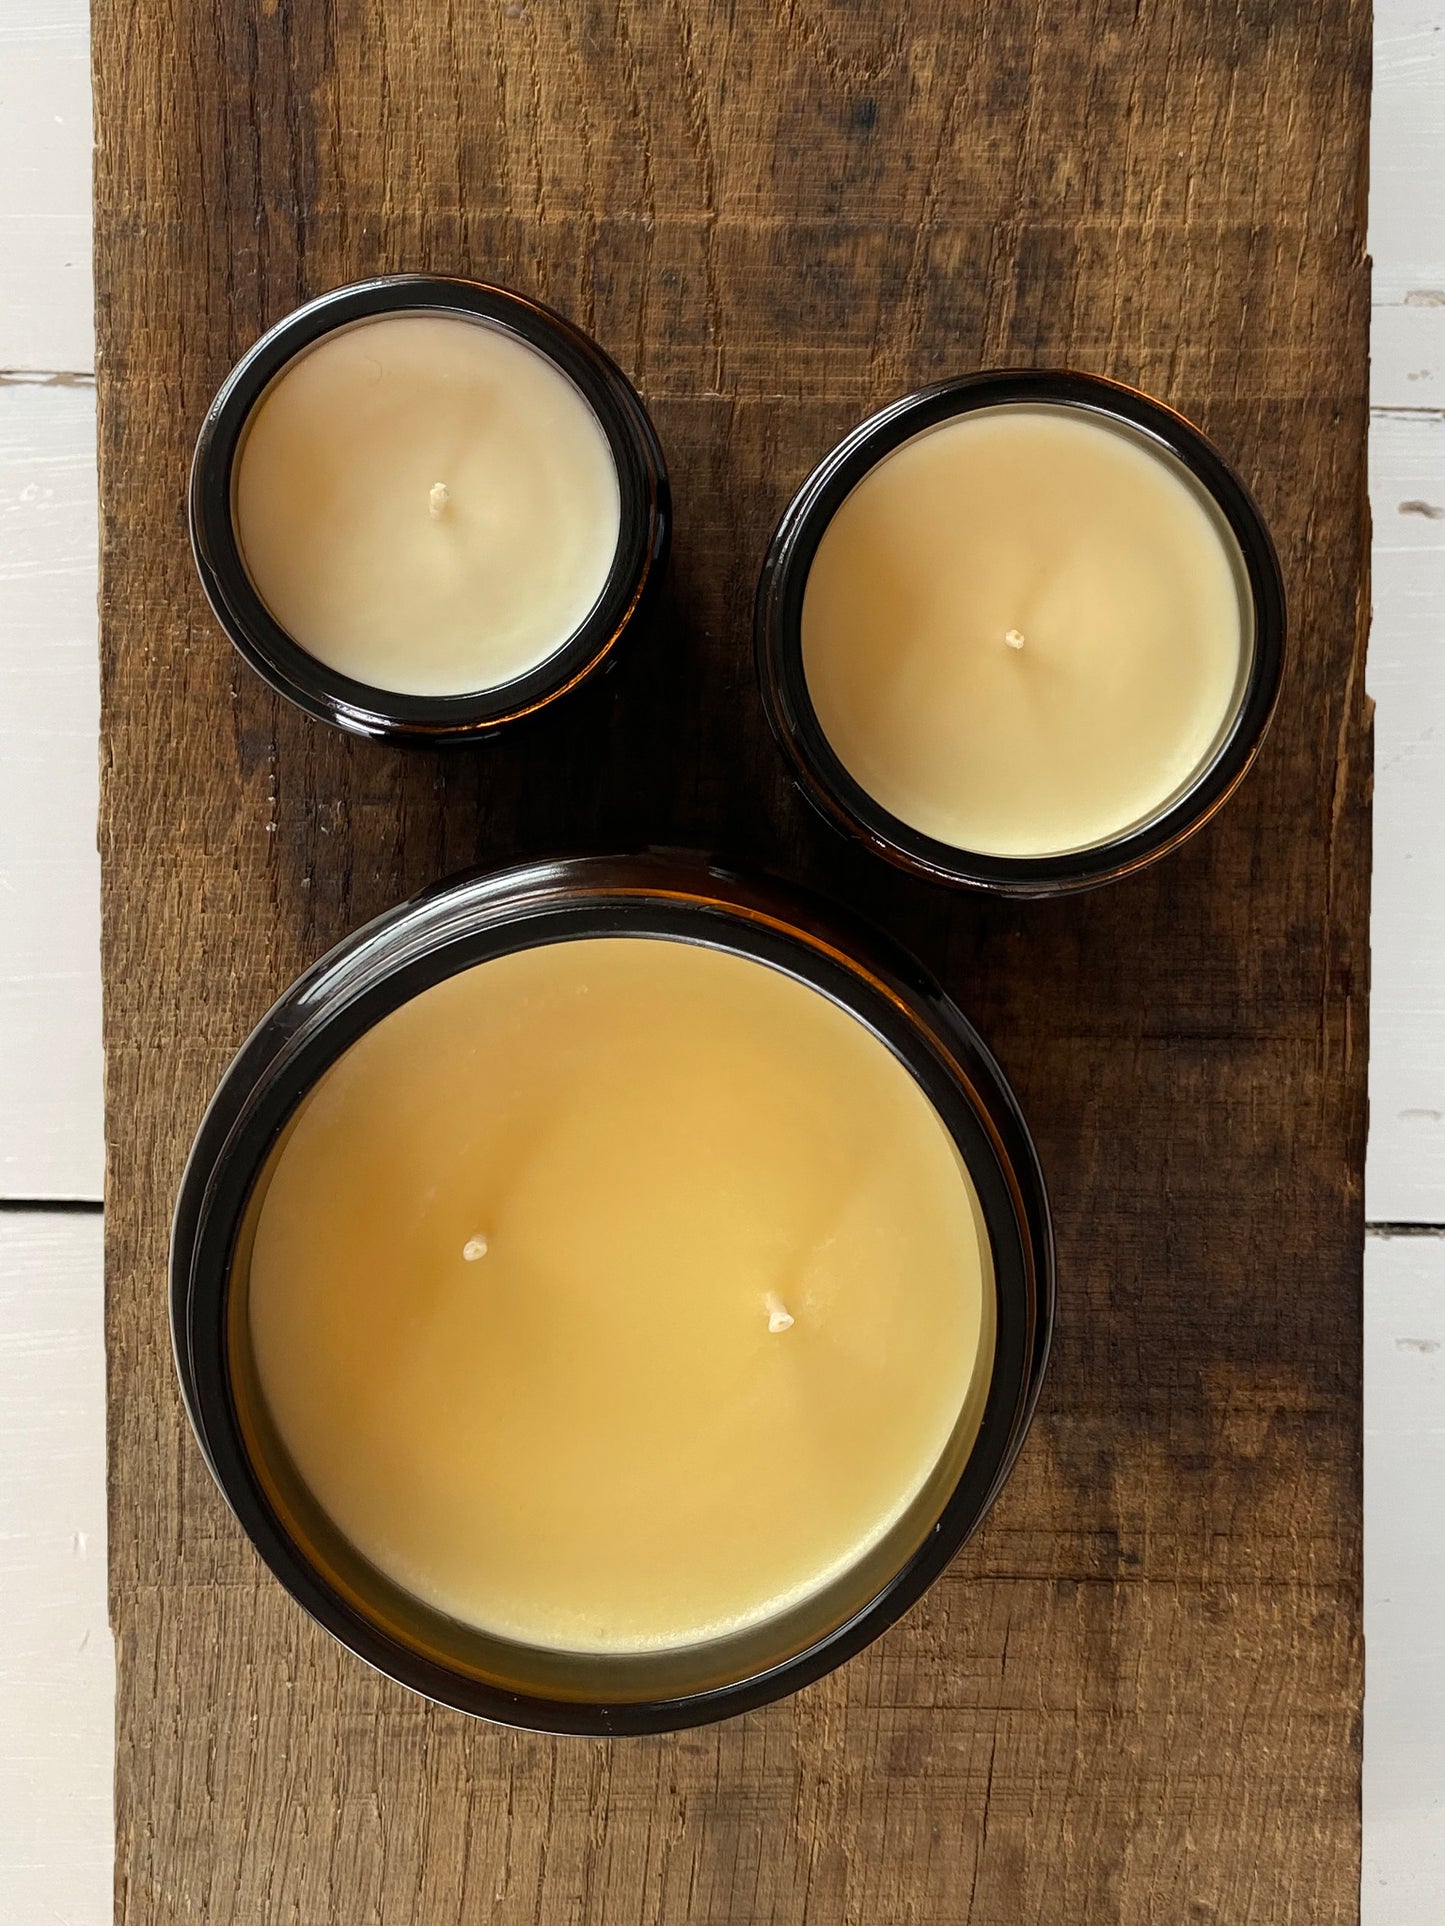 Bouclé soy wax natural candle sizes: 120ml, 180ml and 500ml double wick. In amber glass apothecary jars with cotton wicks, they smell natural and relaxing.